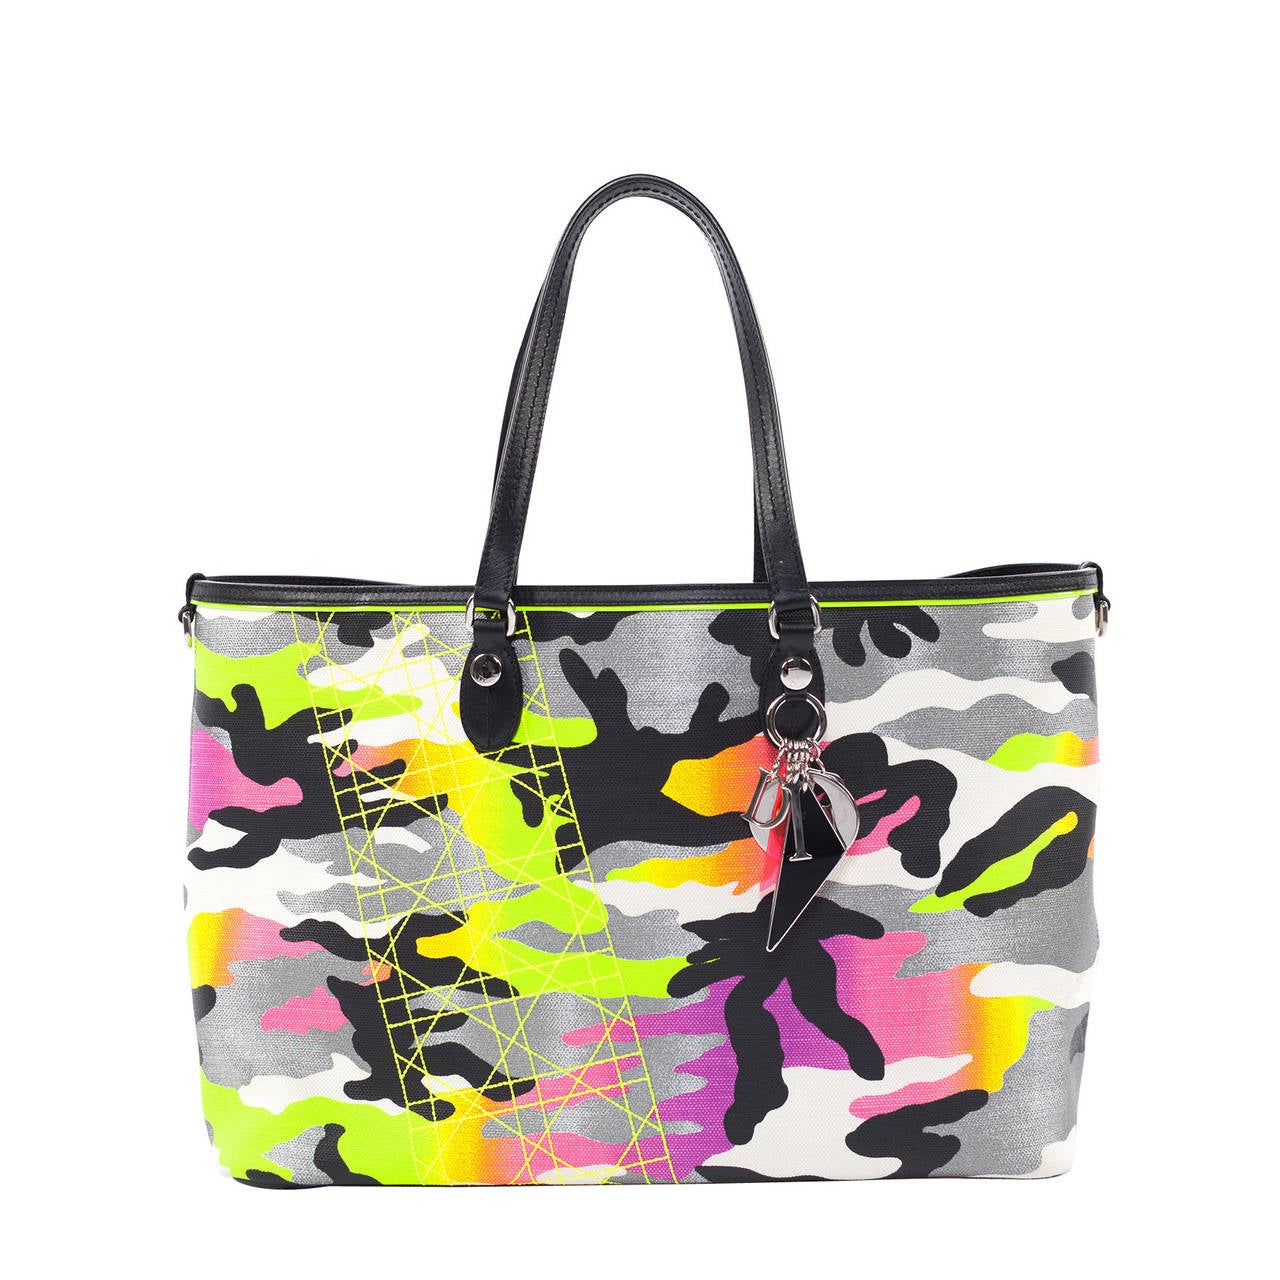 Dior X Anselm Rhyle Neon Camouflage large tote bag from SS 2012